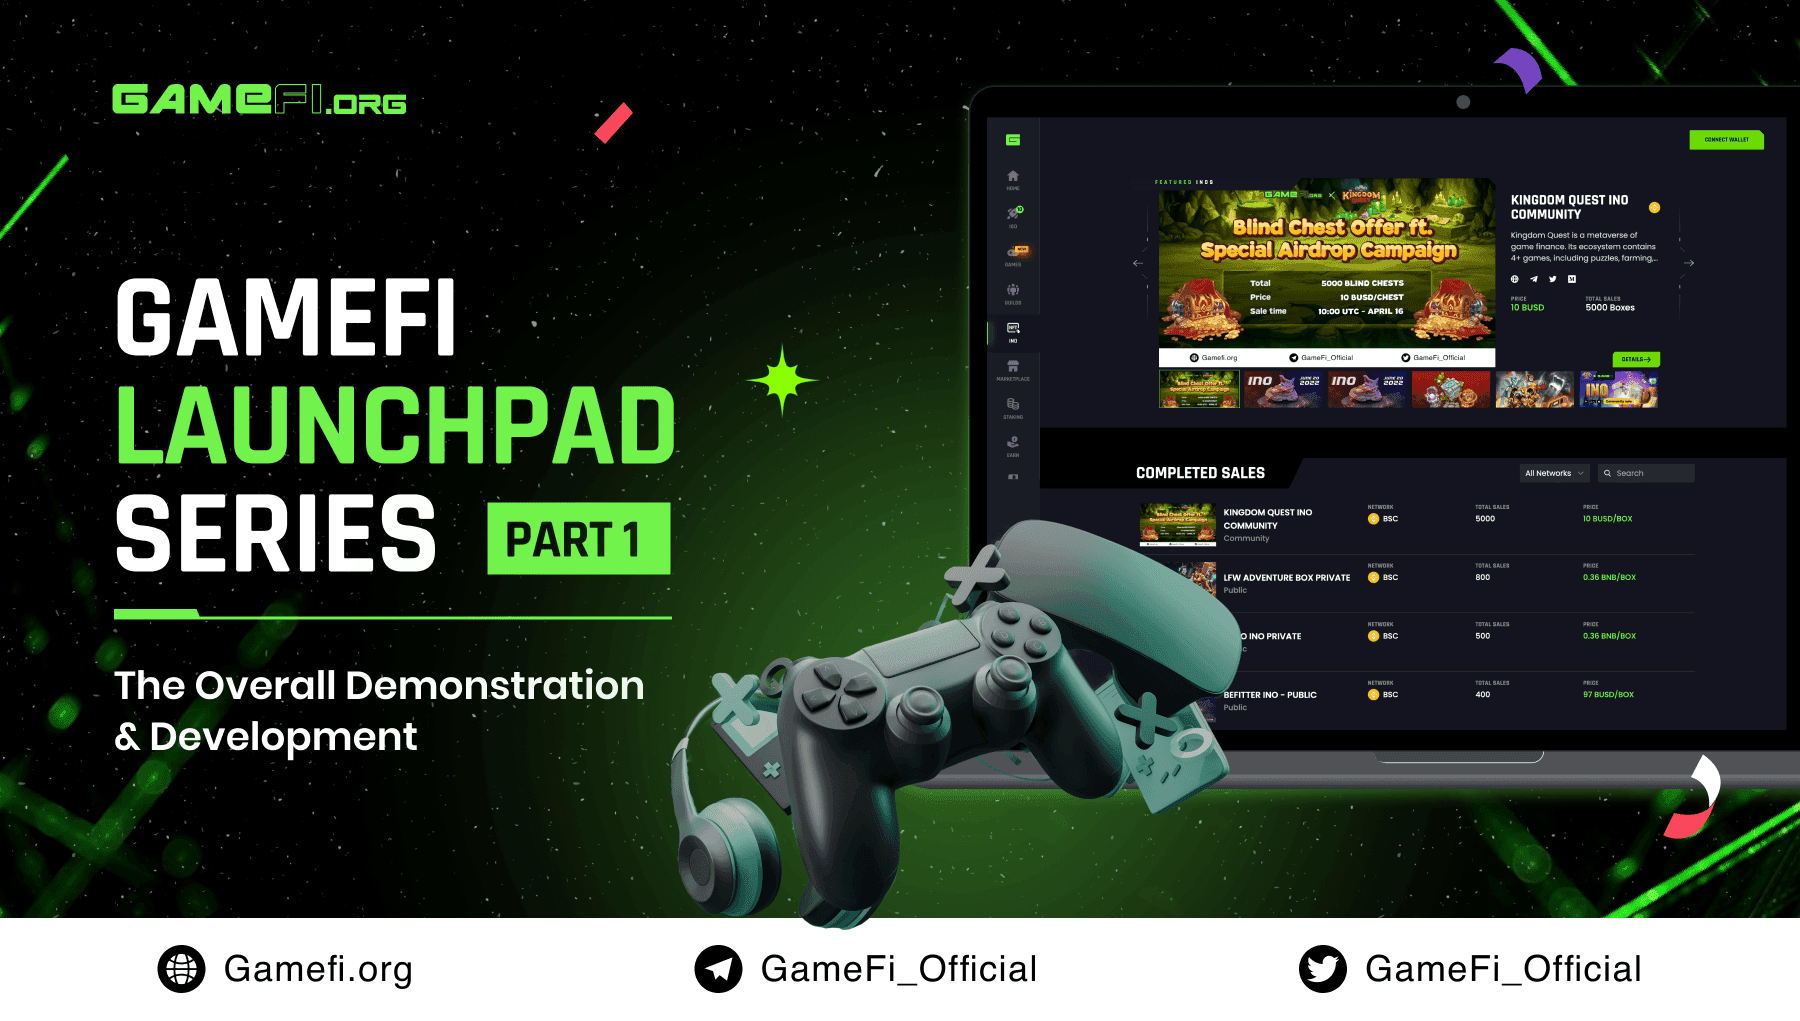 GameFi Launchpad Series - Part 1: The Overall Demonstration and Development